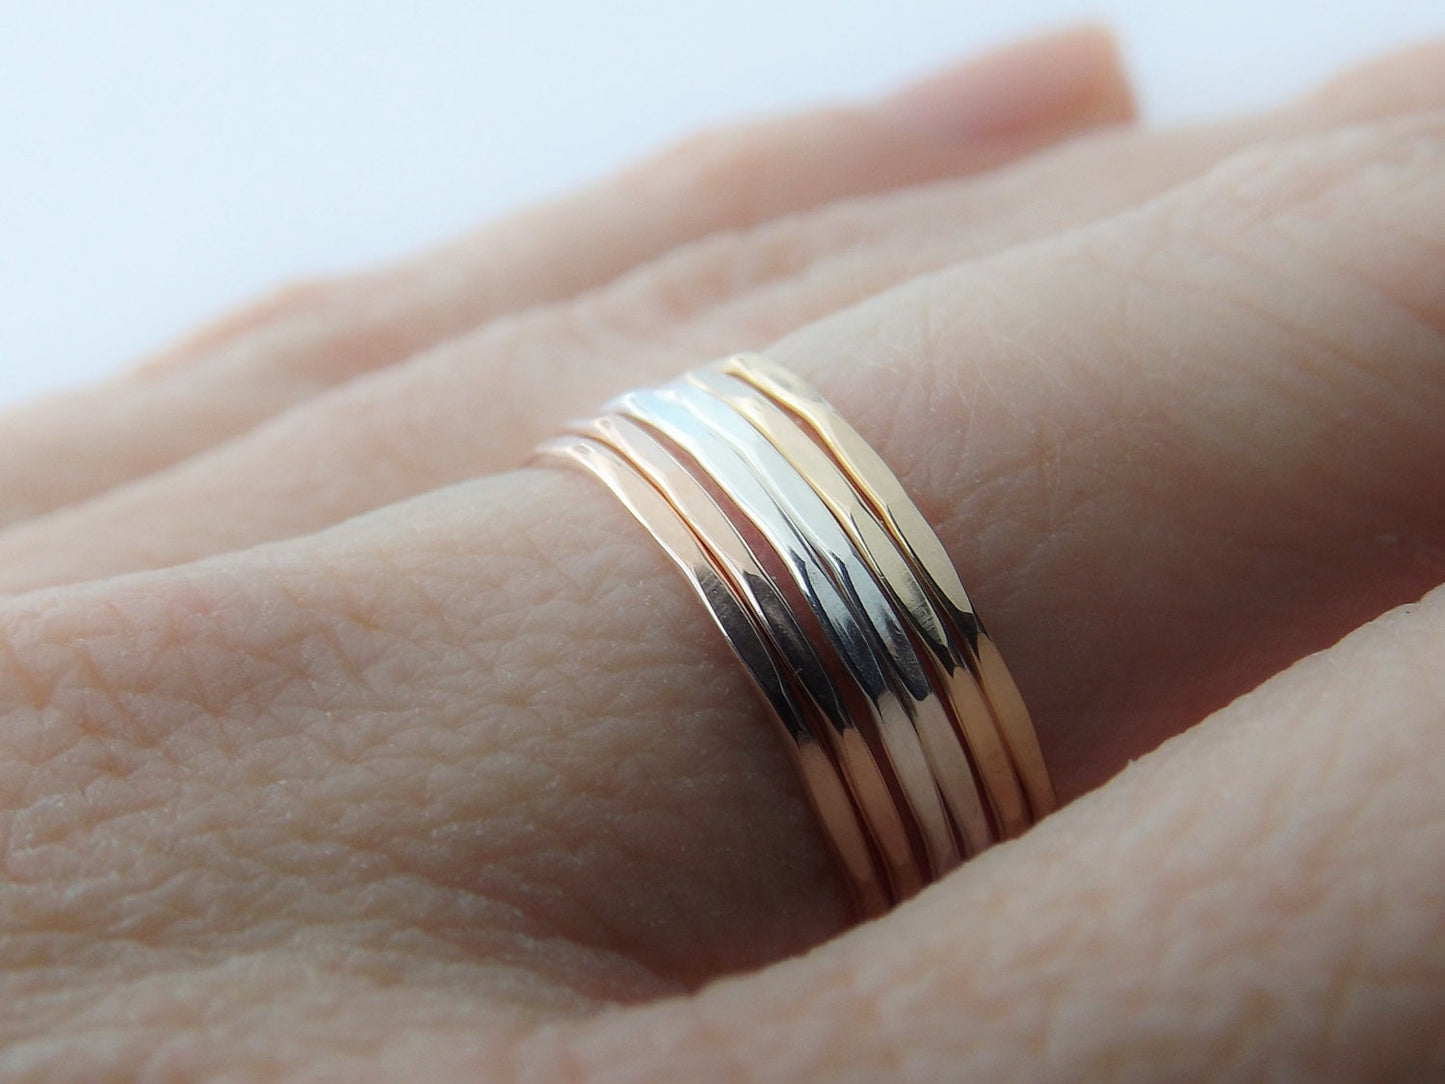 1 Super Skinny Stacking Ring, Knuckle Ring, Thumb Ring, Gold Ring, Stacking Ring, Hammered Ring, Skinny Ring, Thin Rings, Textured Ring